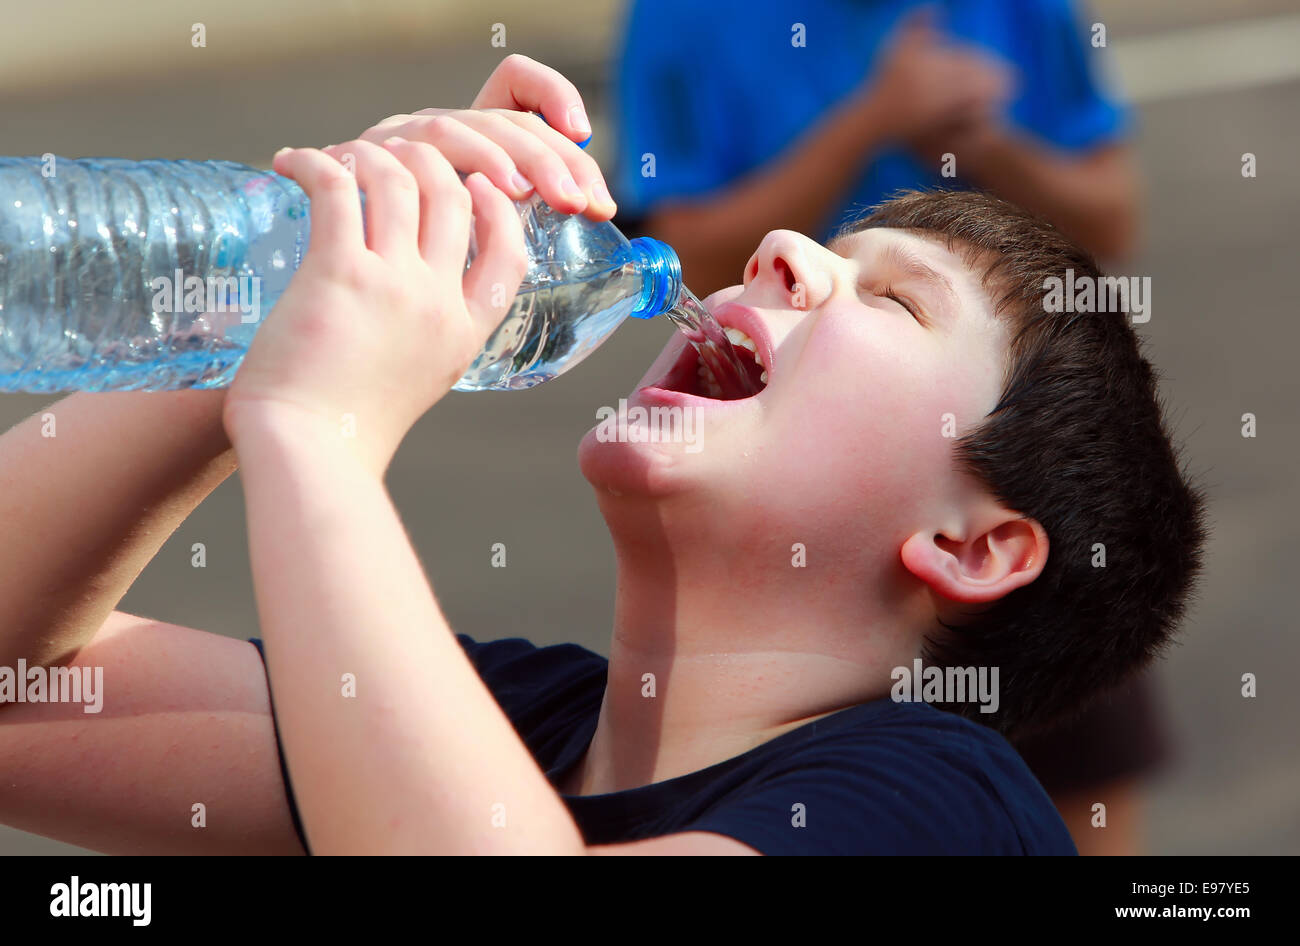 https://c8.alamy.com/comp/E97YE5/a-boy-thirsty-eagerly-drinking-water-from-plastic-bottle-E97YE5.jpg